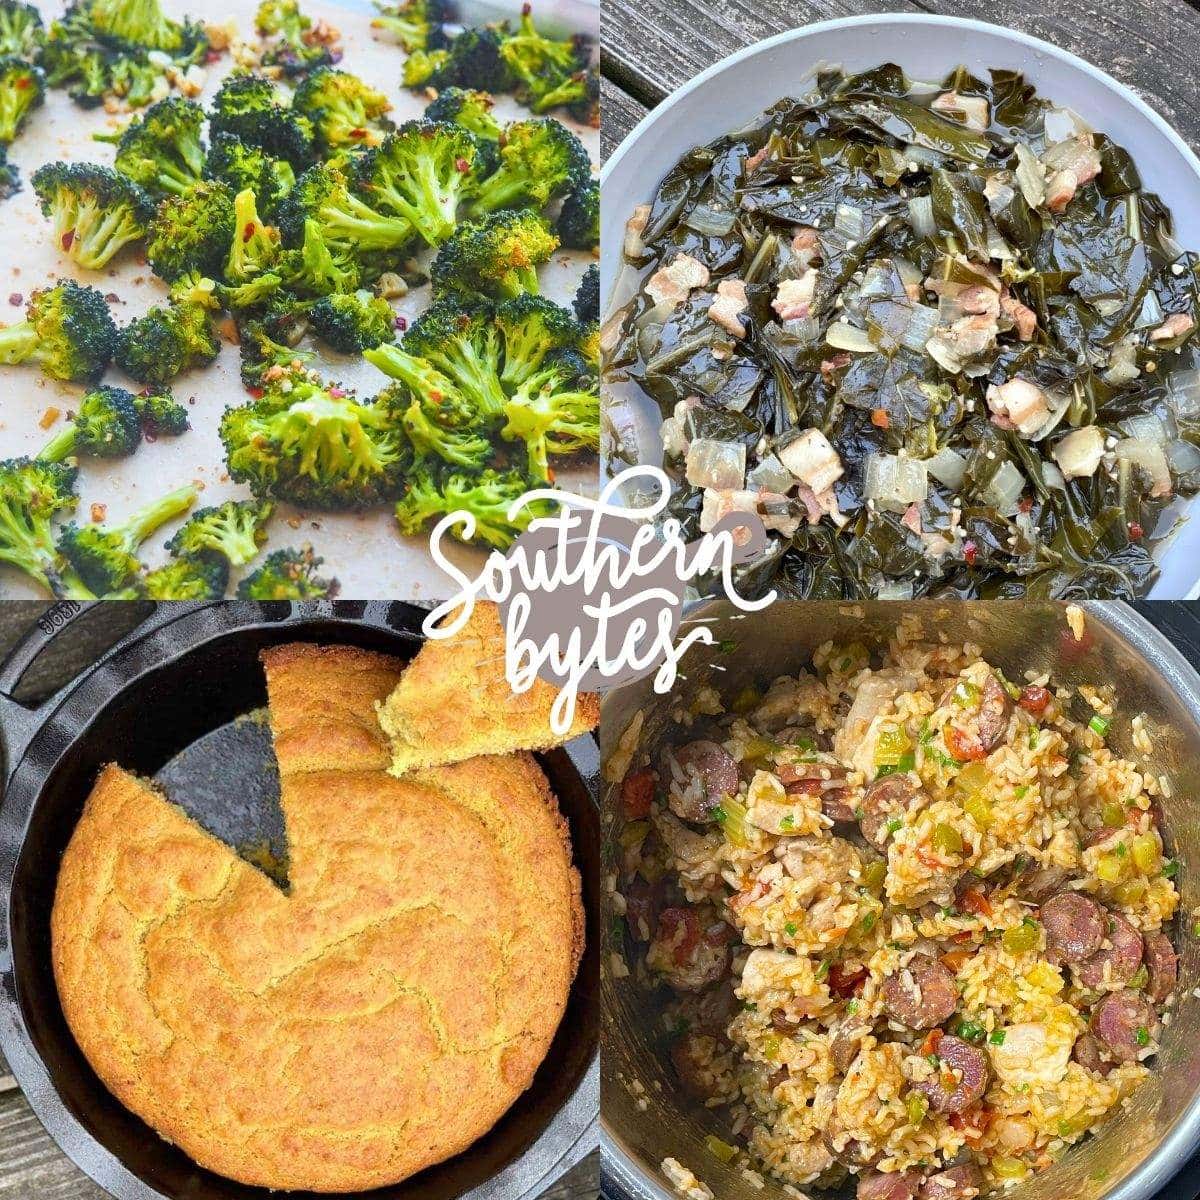 A collage of images showing sides to serve with jambalaya; cornbread, collard greens, and roasted broccoli.